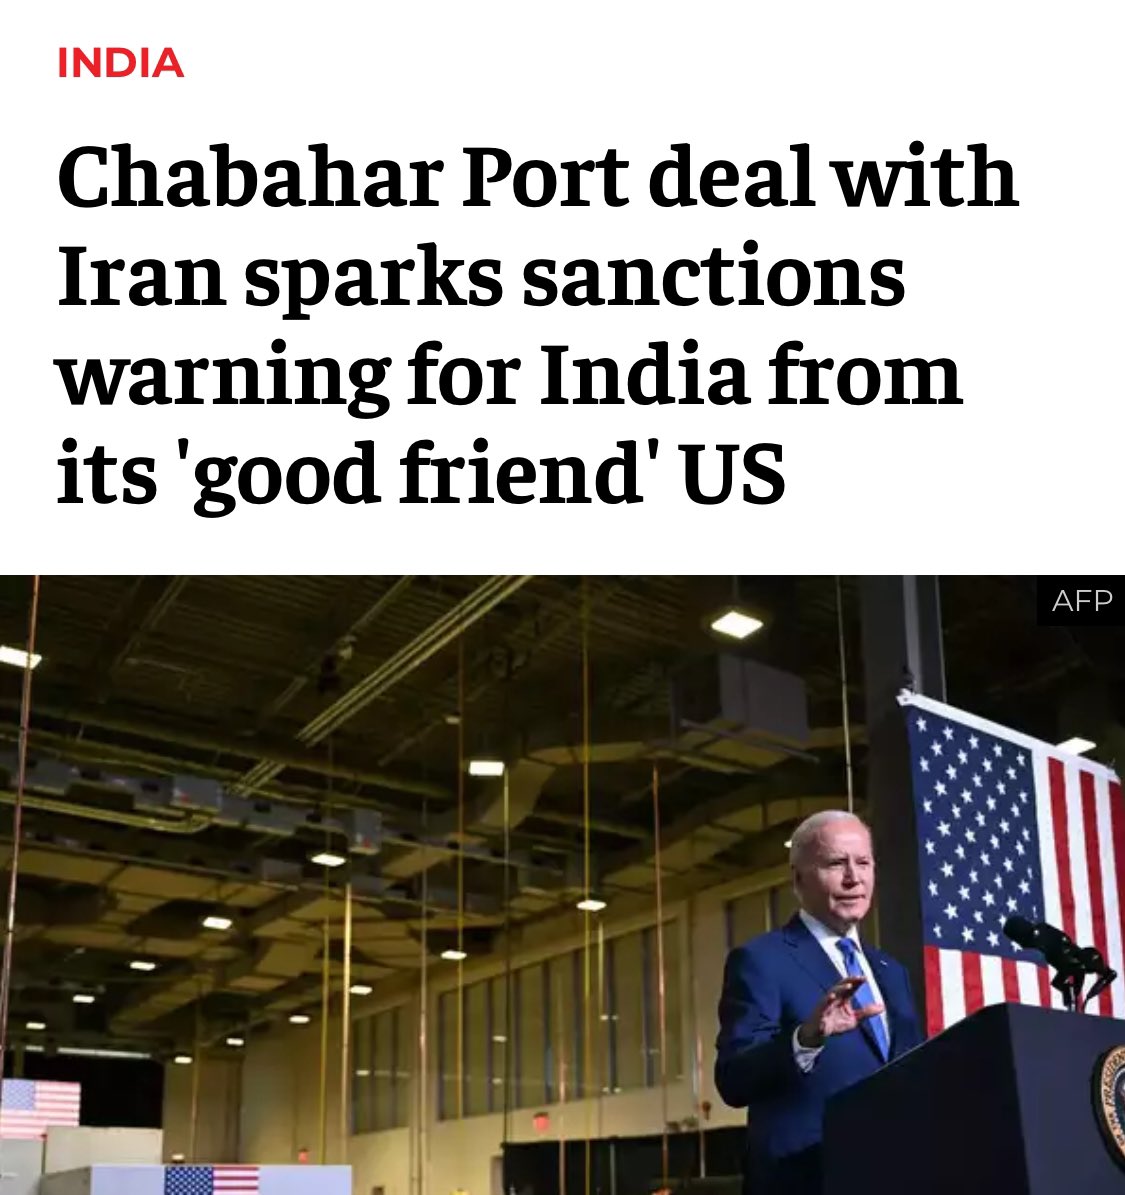 US is threatening India with sanctions after we signed a 10 year deal with #Iran for #ChabaharPort. 
This time we must stand up.